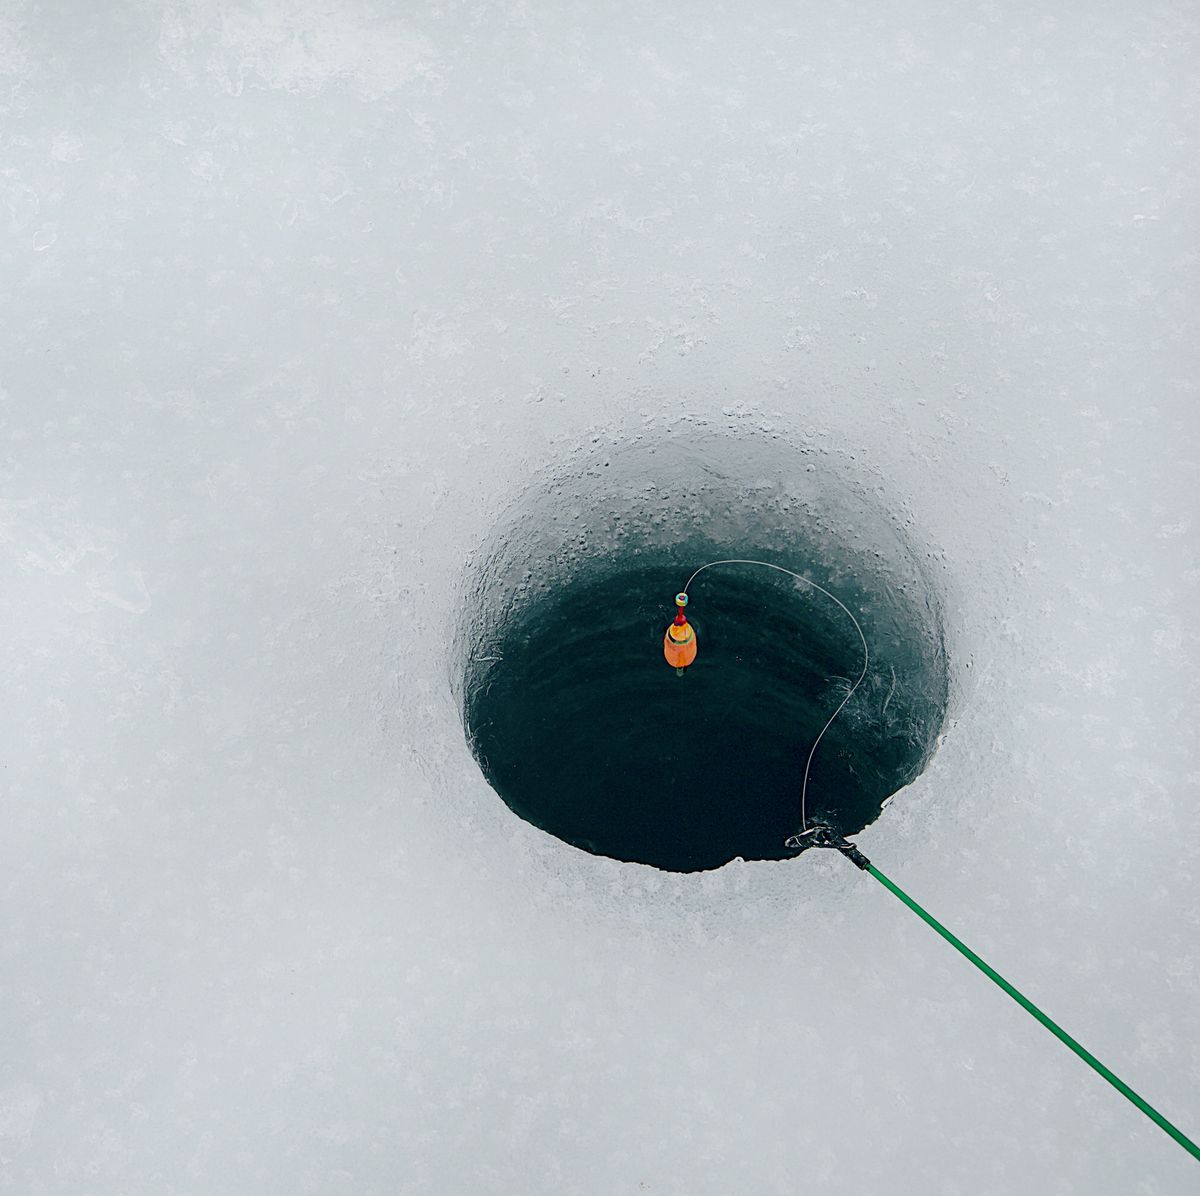 How To Get Started in Ice Fishing